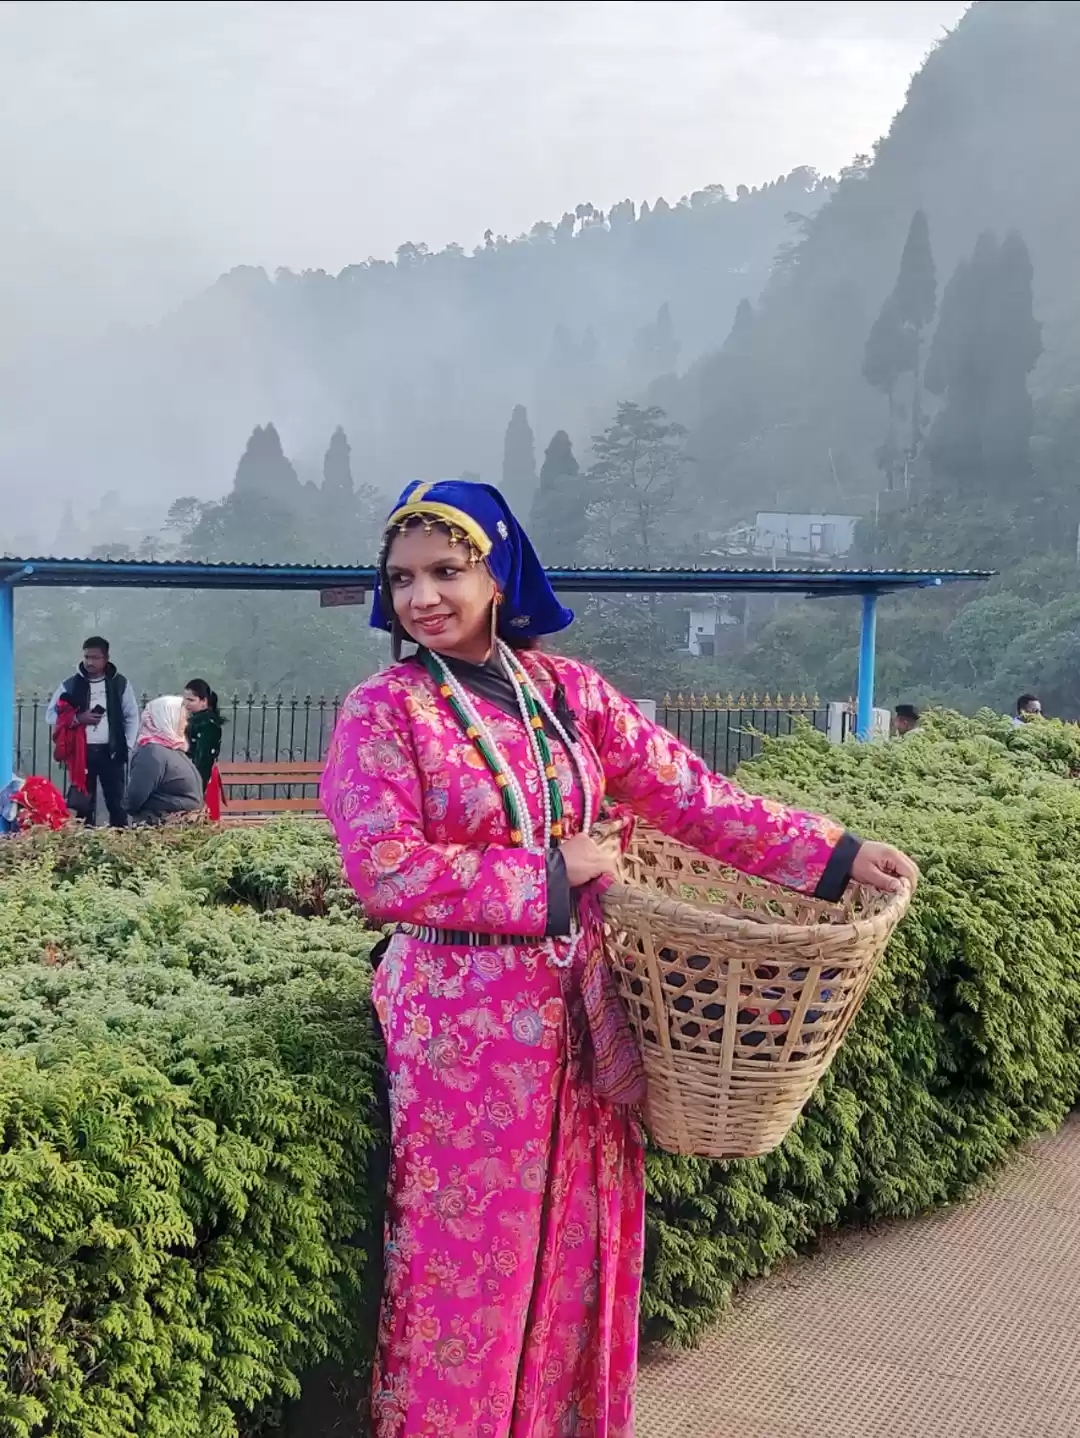 In the traditional attire of the people of Darjeeling! | Flickr